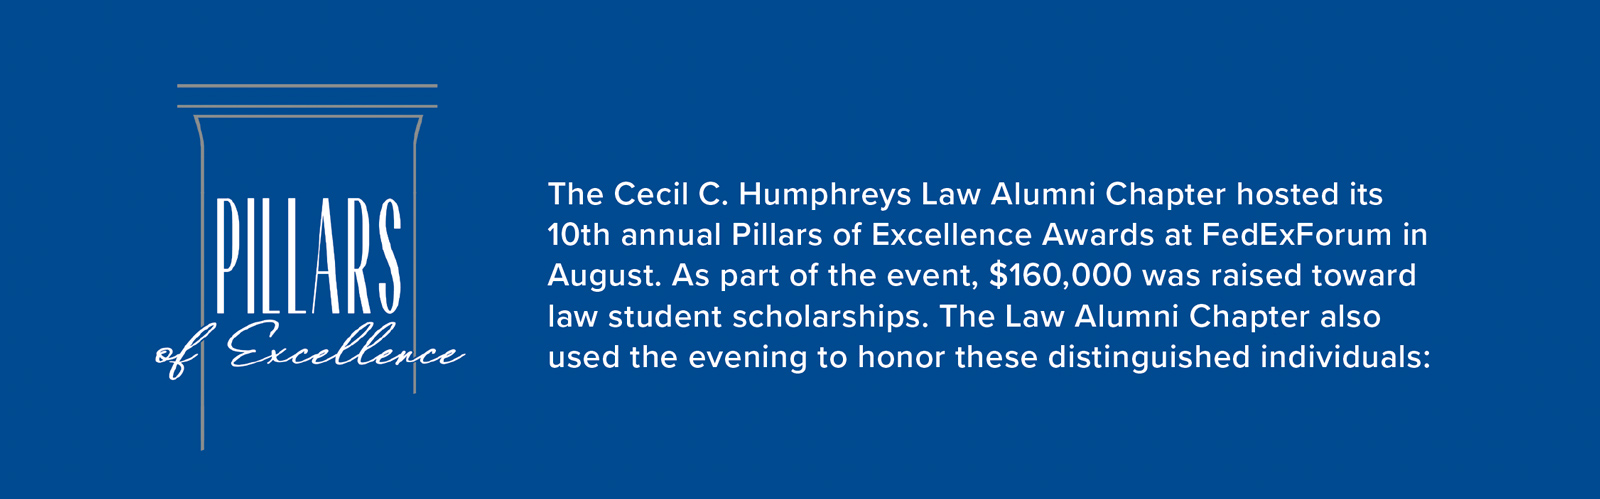 The Cecil C. Humphreys Law Alumni Chapter hosted its 10th annual Pillars of Excellence Awards at FedExForum in August. As part of the event, $160,000 was raised toward law student scholarships. The Law Alumni Chapter also used the evening to honor these distinguished individuals: